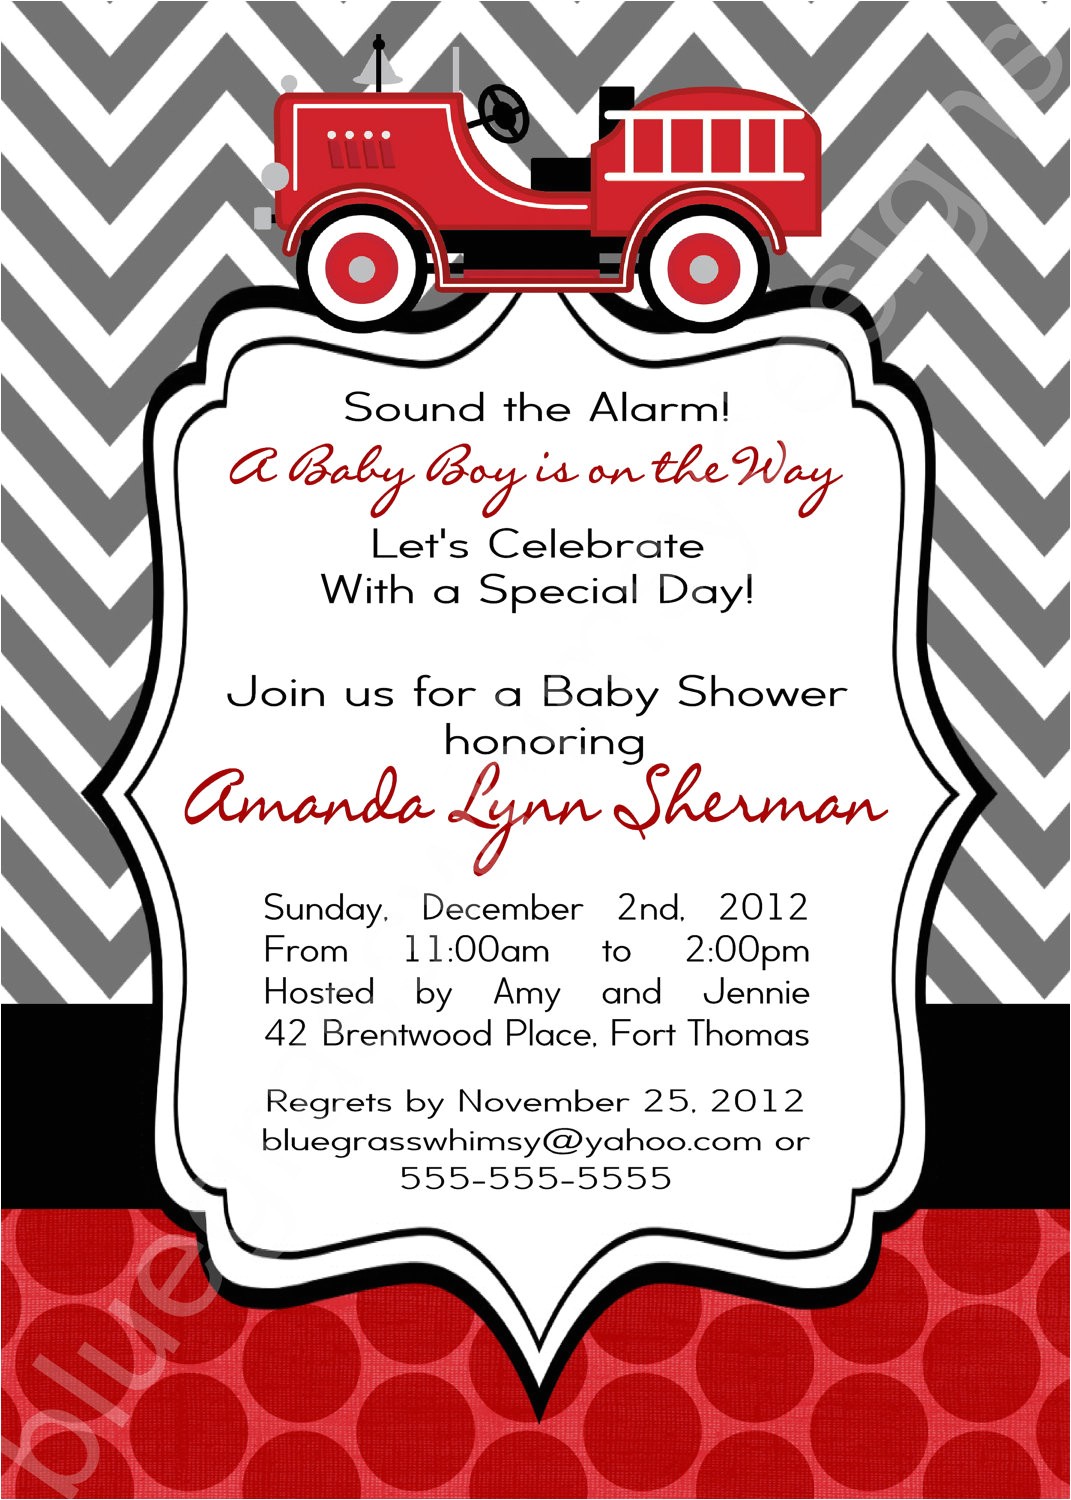 firetruck baby shower invitation for a